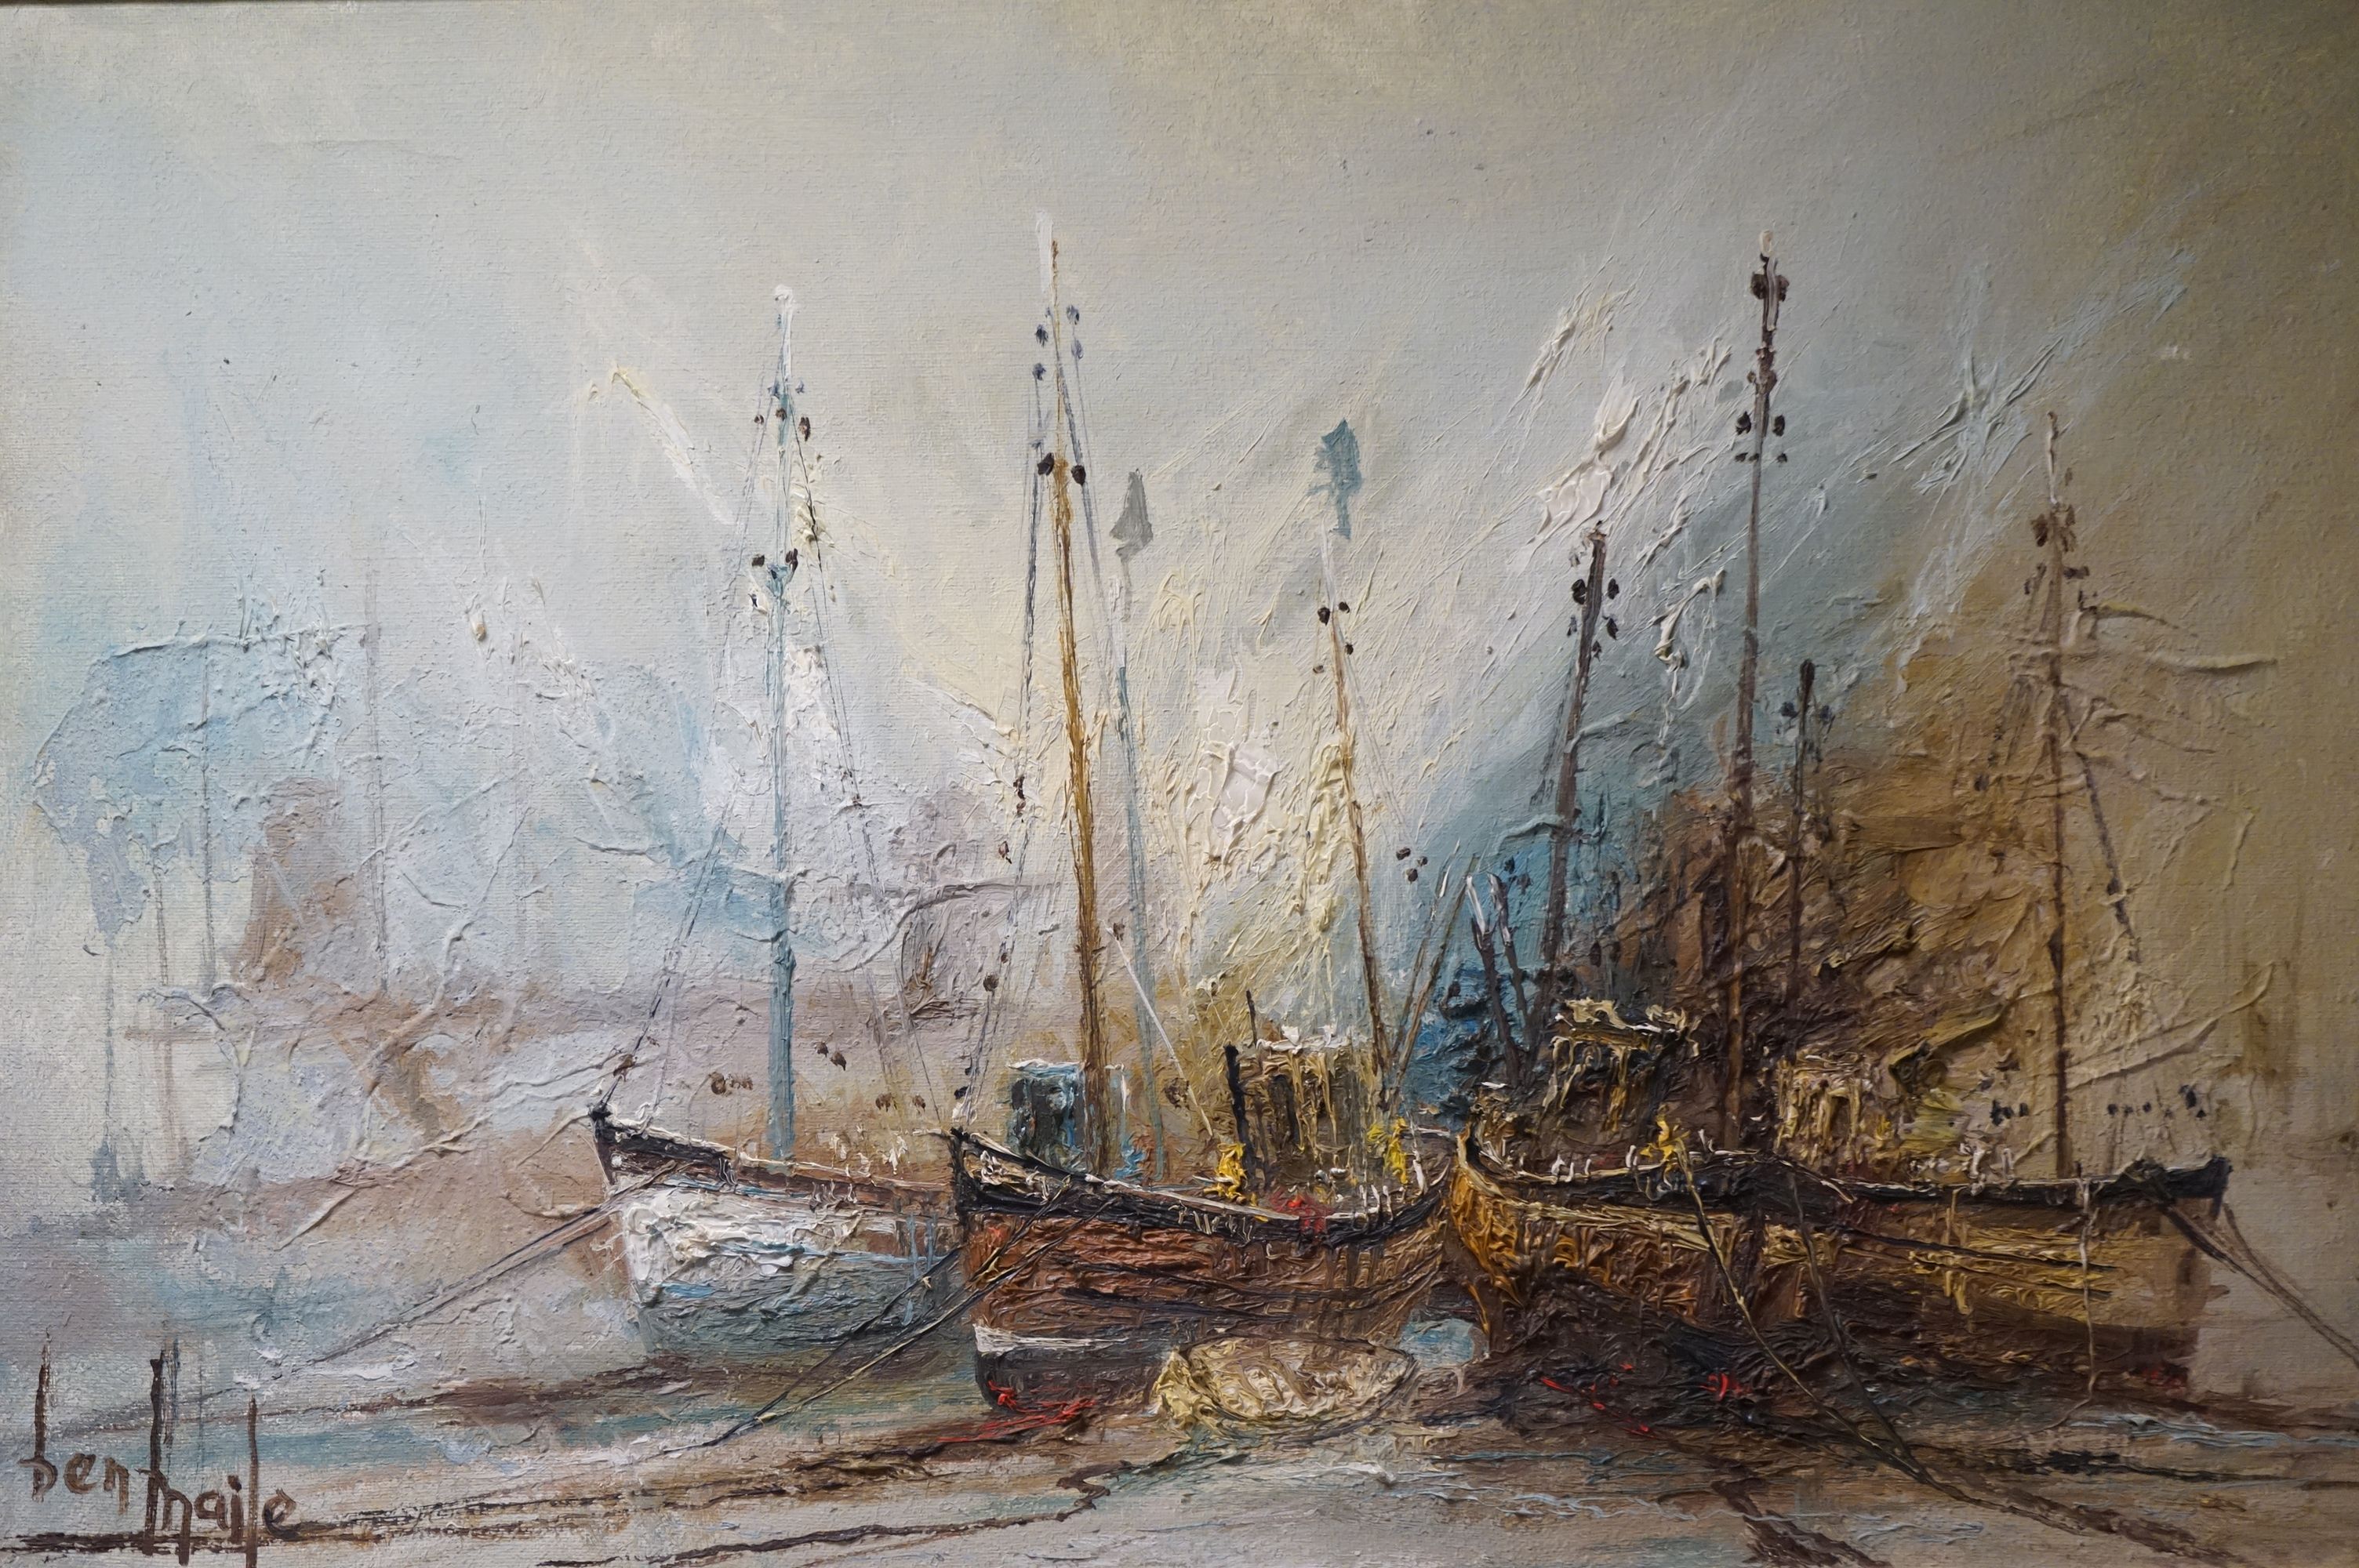 Ben Maile (1922 - 2017) Oil Painting on Canvas depicting tethered Sailing Boats, 60cms x 90cms, - Image 3 of 4